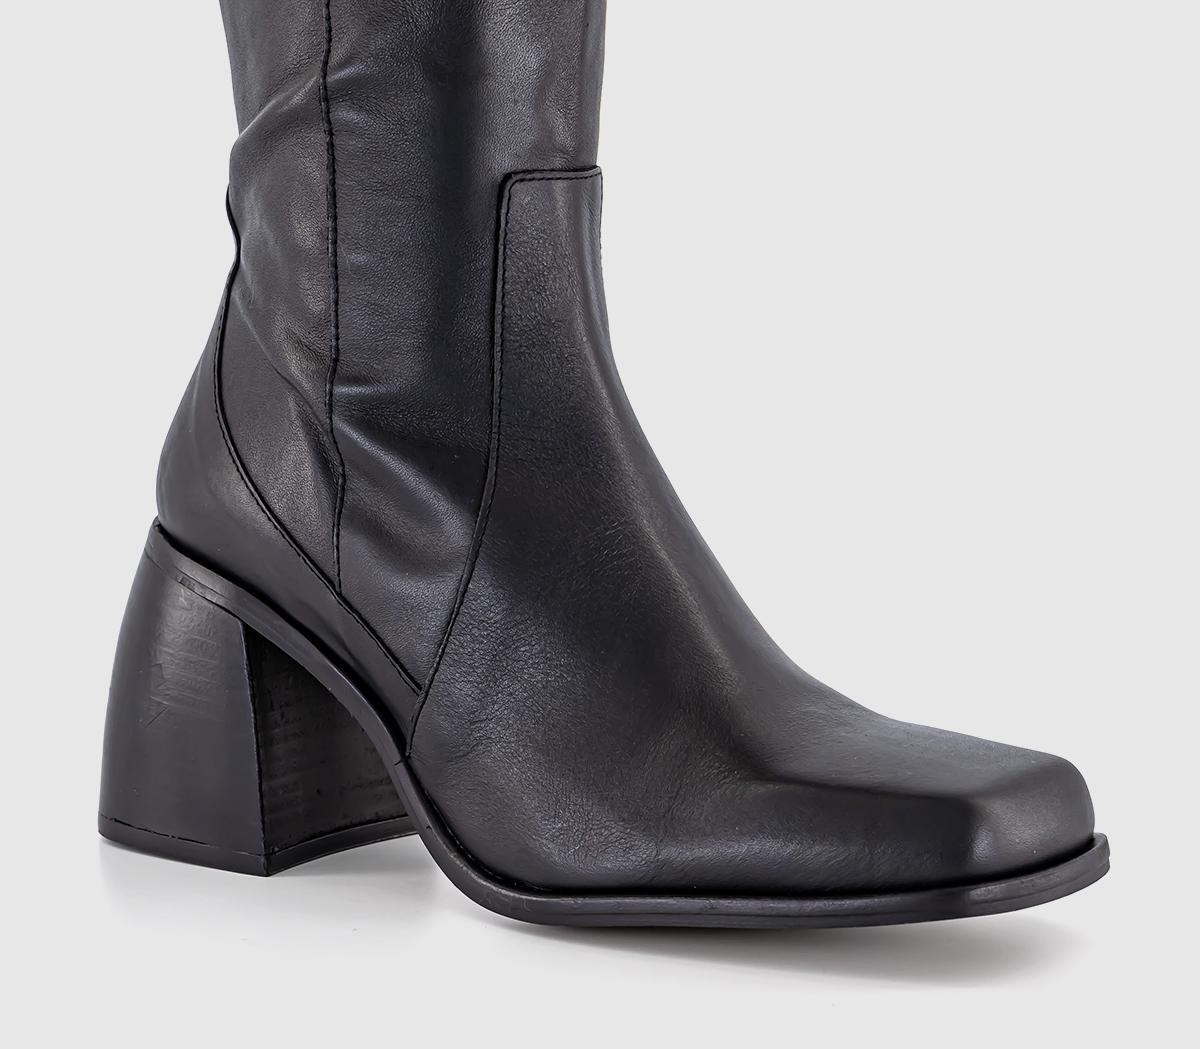 OFFICE Kameron Square Toe Knee Boots Black Leather - Knee High Boots